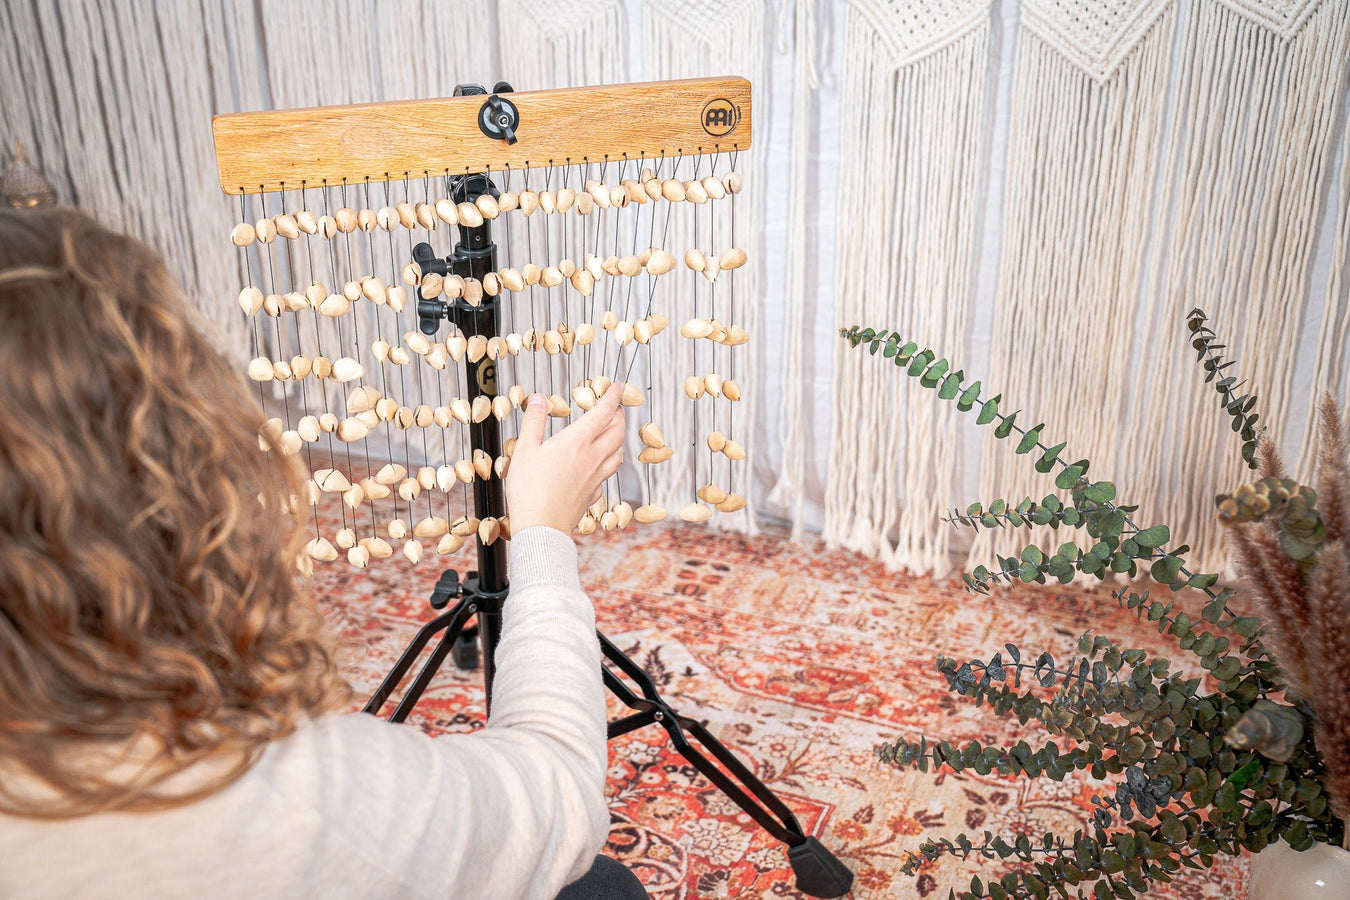 Chimes and Shakers - Sound Healing LAB